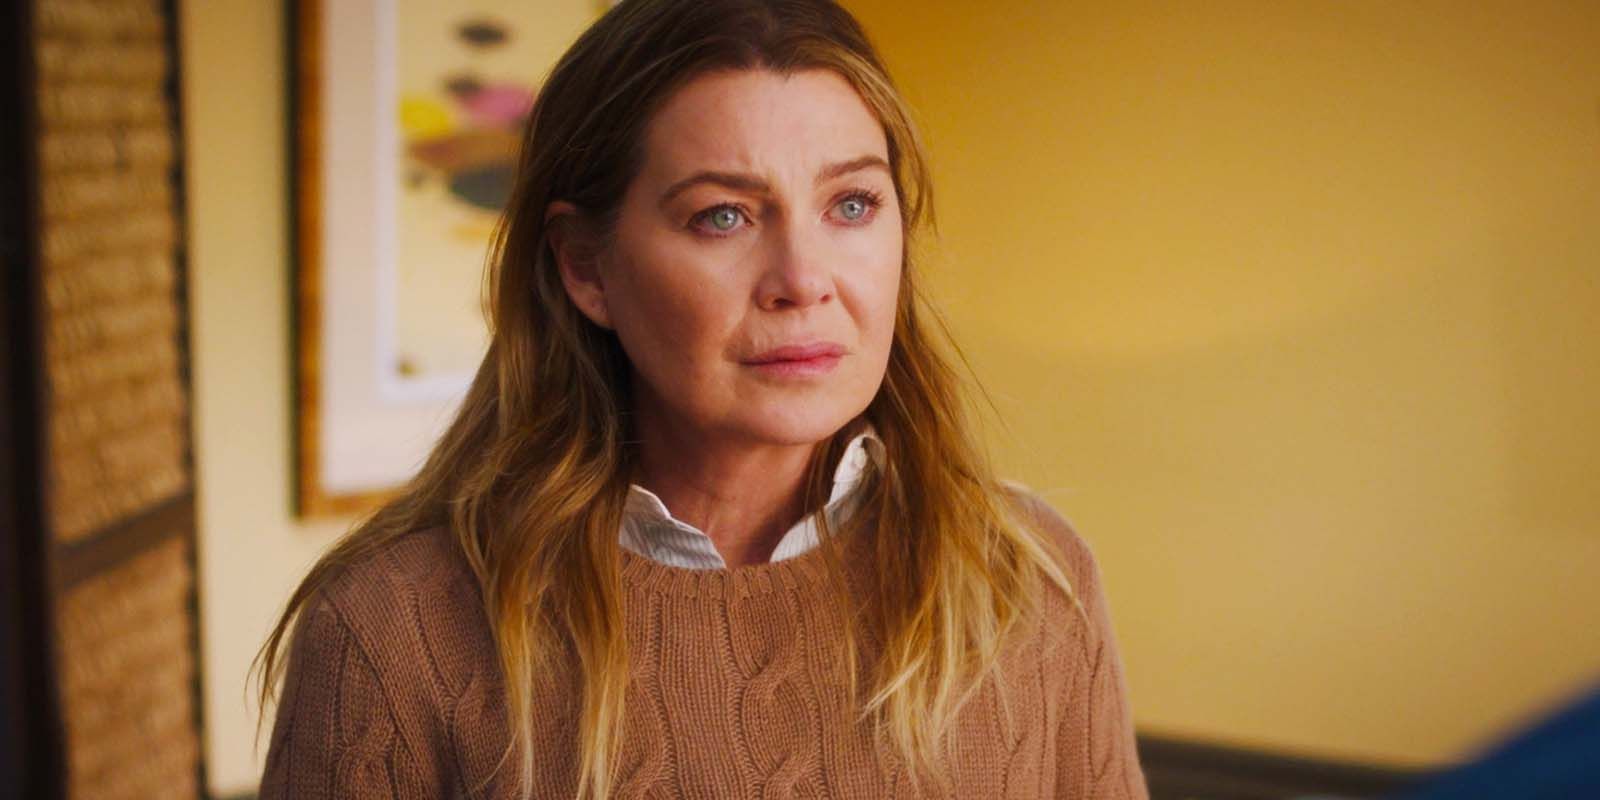 Grey’s Anatomy Season 20 Cliffhanger Ending Teased By Cast: “Edge Of Your Seat”